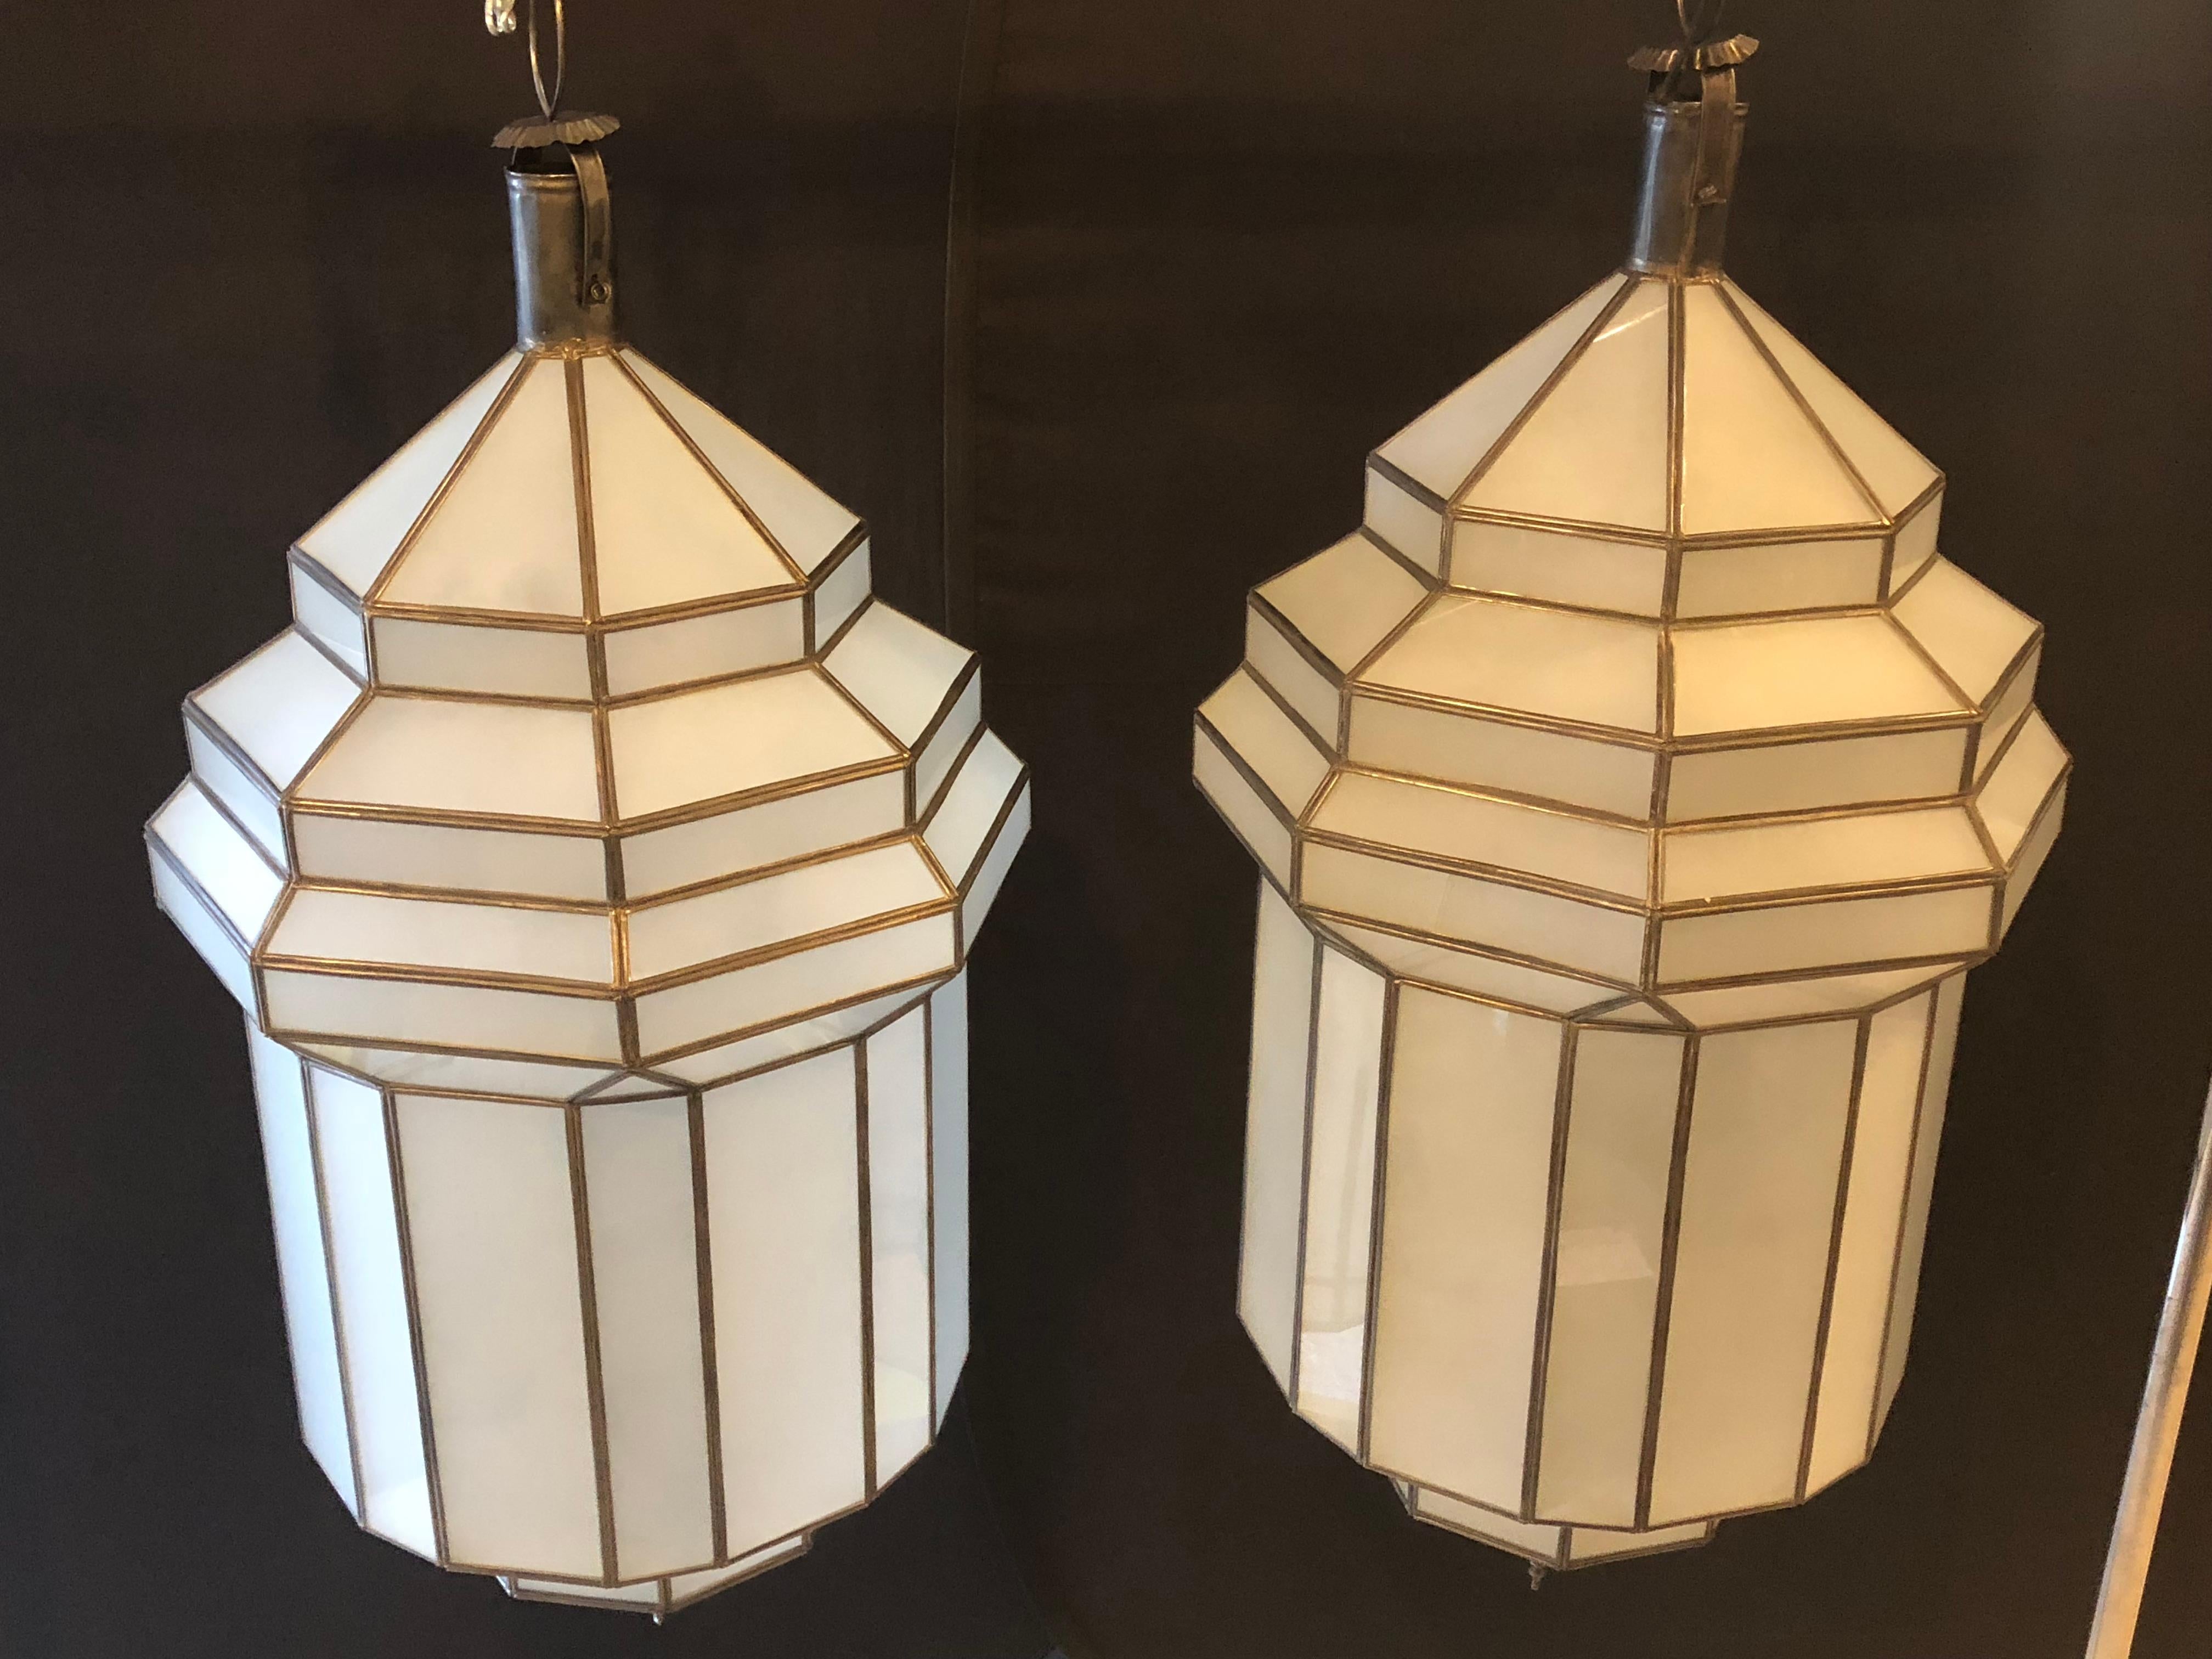 A gorgeous handcrafted, having individual panes, pair of large Moroccan Moorish hanging lanterns or ceiling fixtures featuring sandblasted frosted milky glass and patinated metal frames. The octagonal shaped large pendants have a small door on the